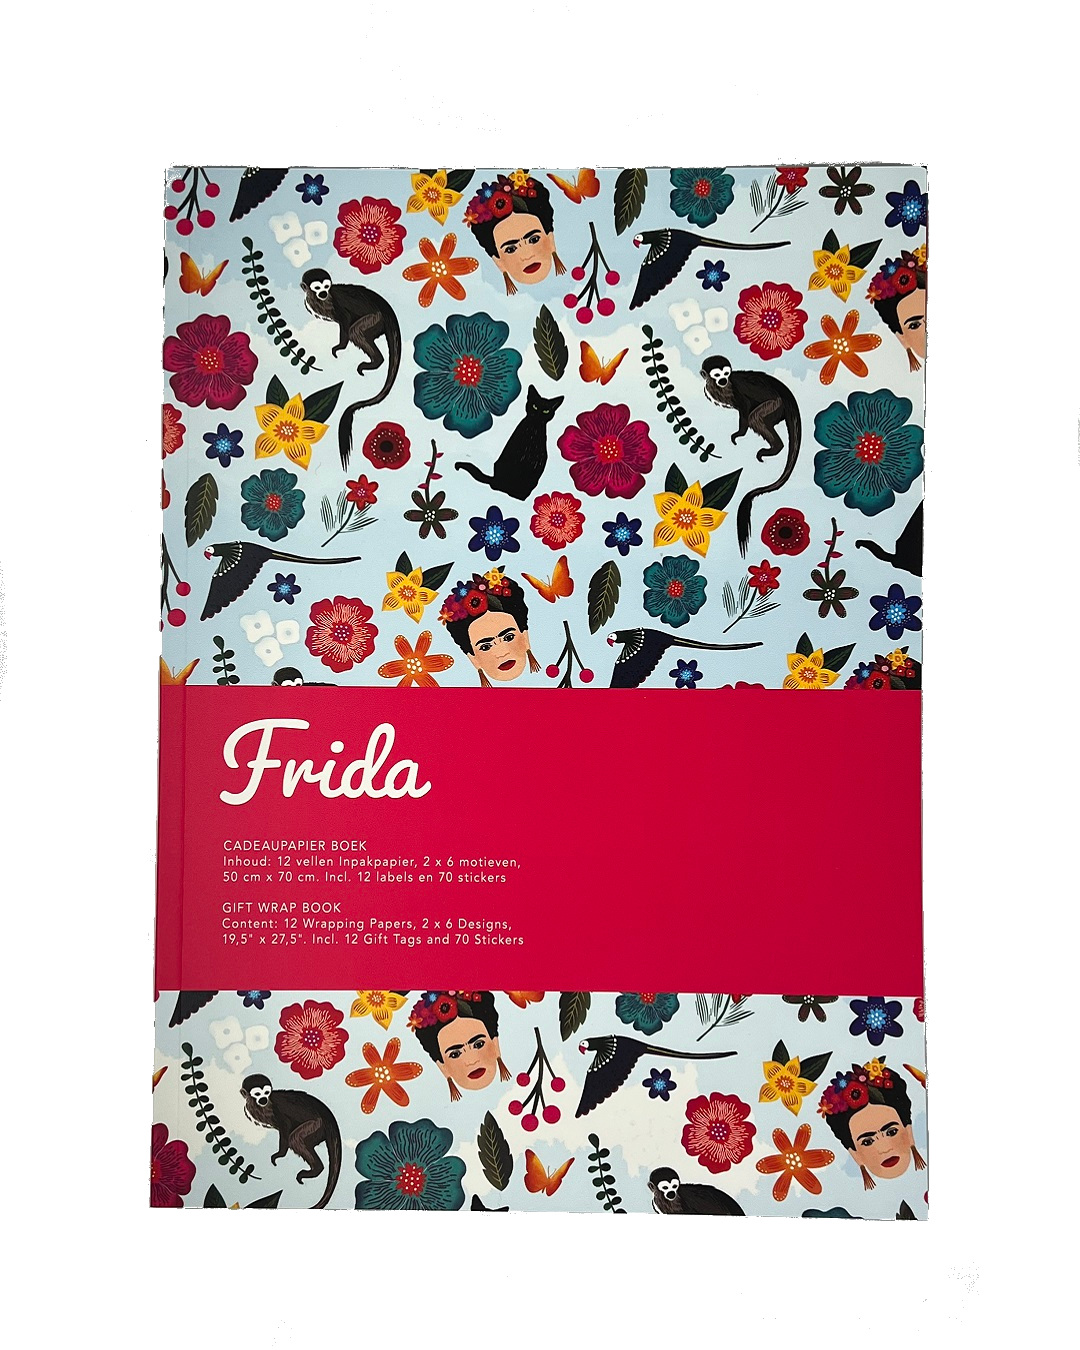 Frida Kahlo wrapping paper